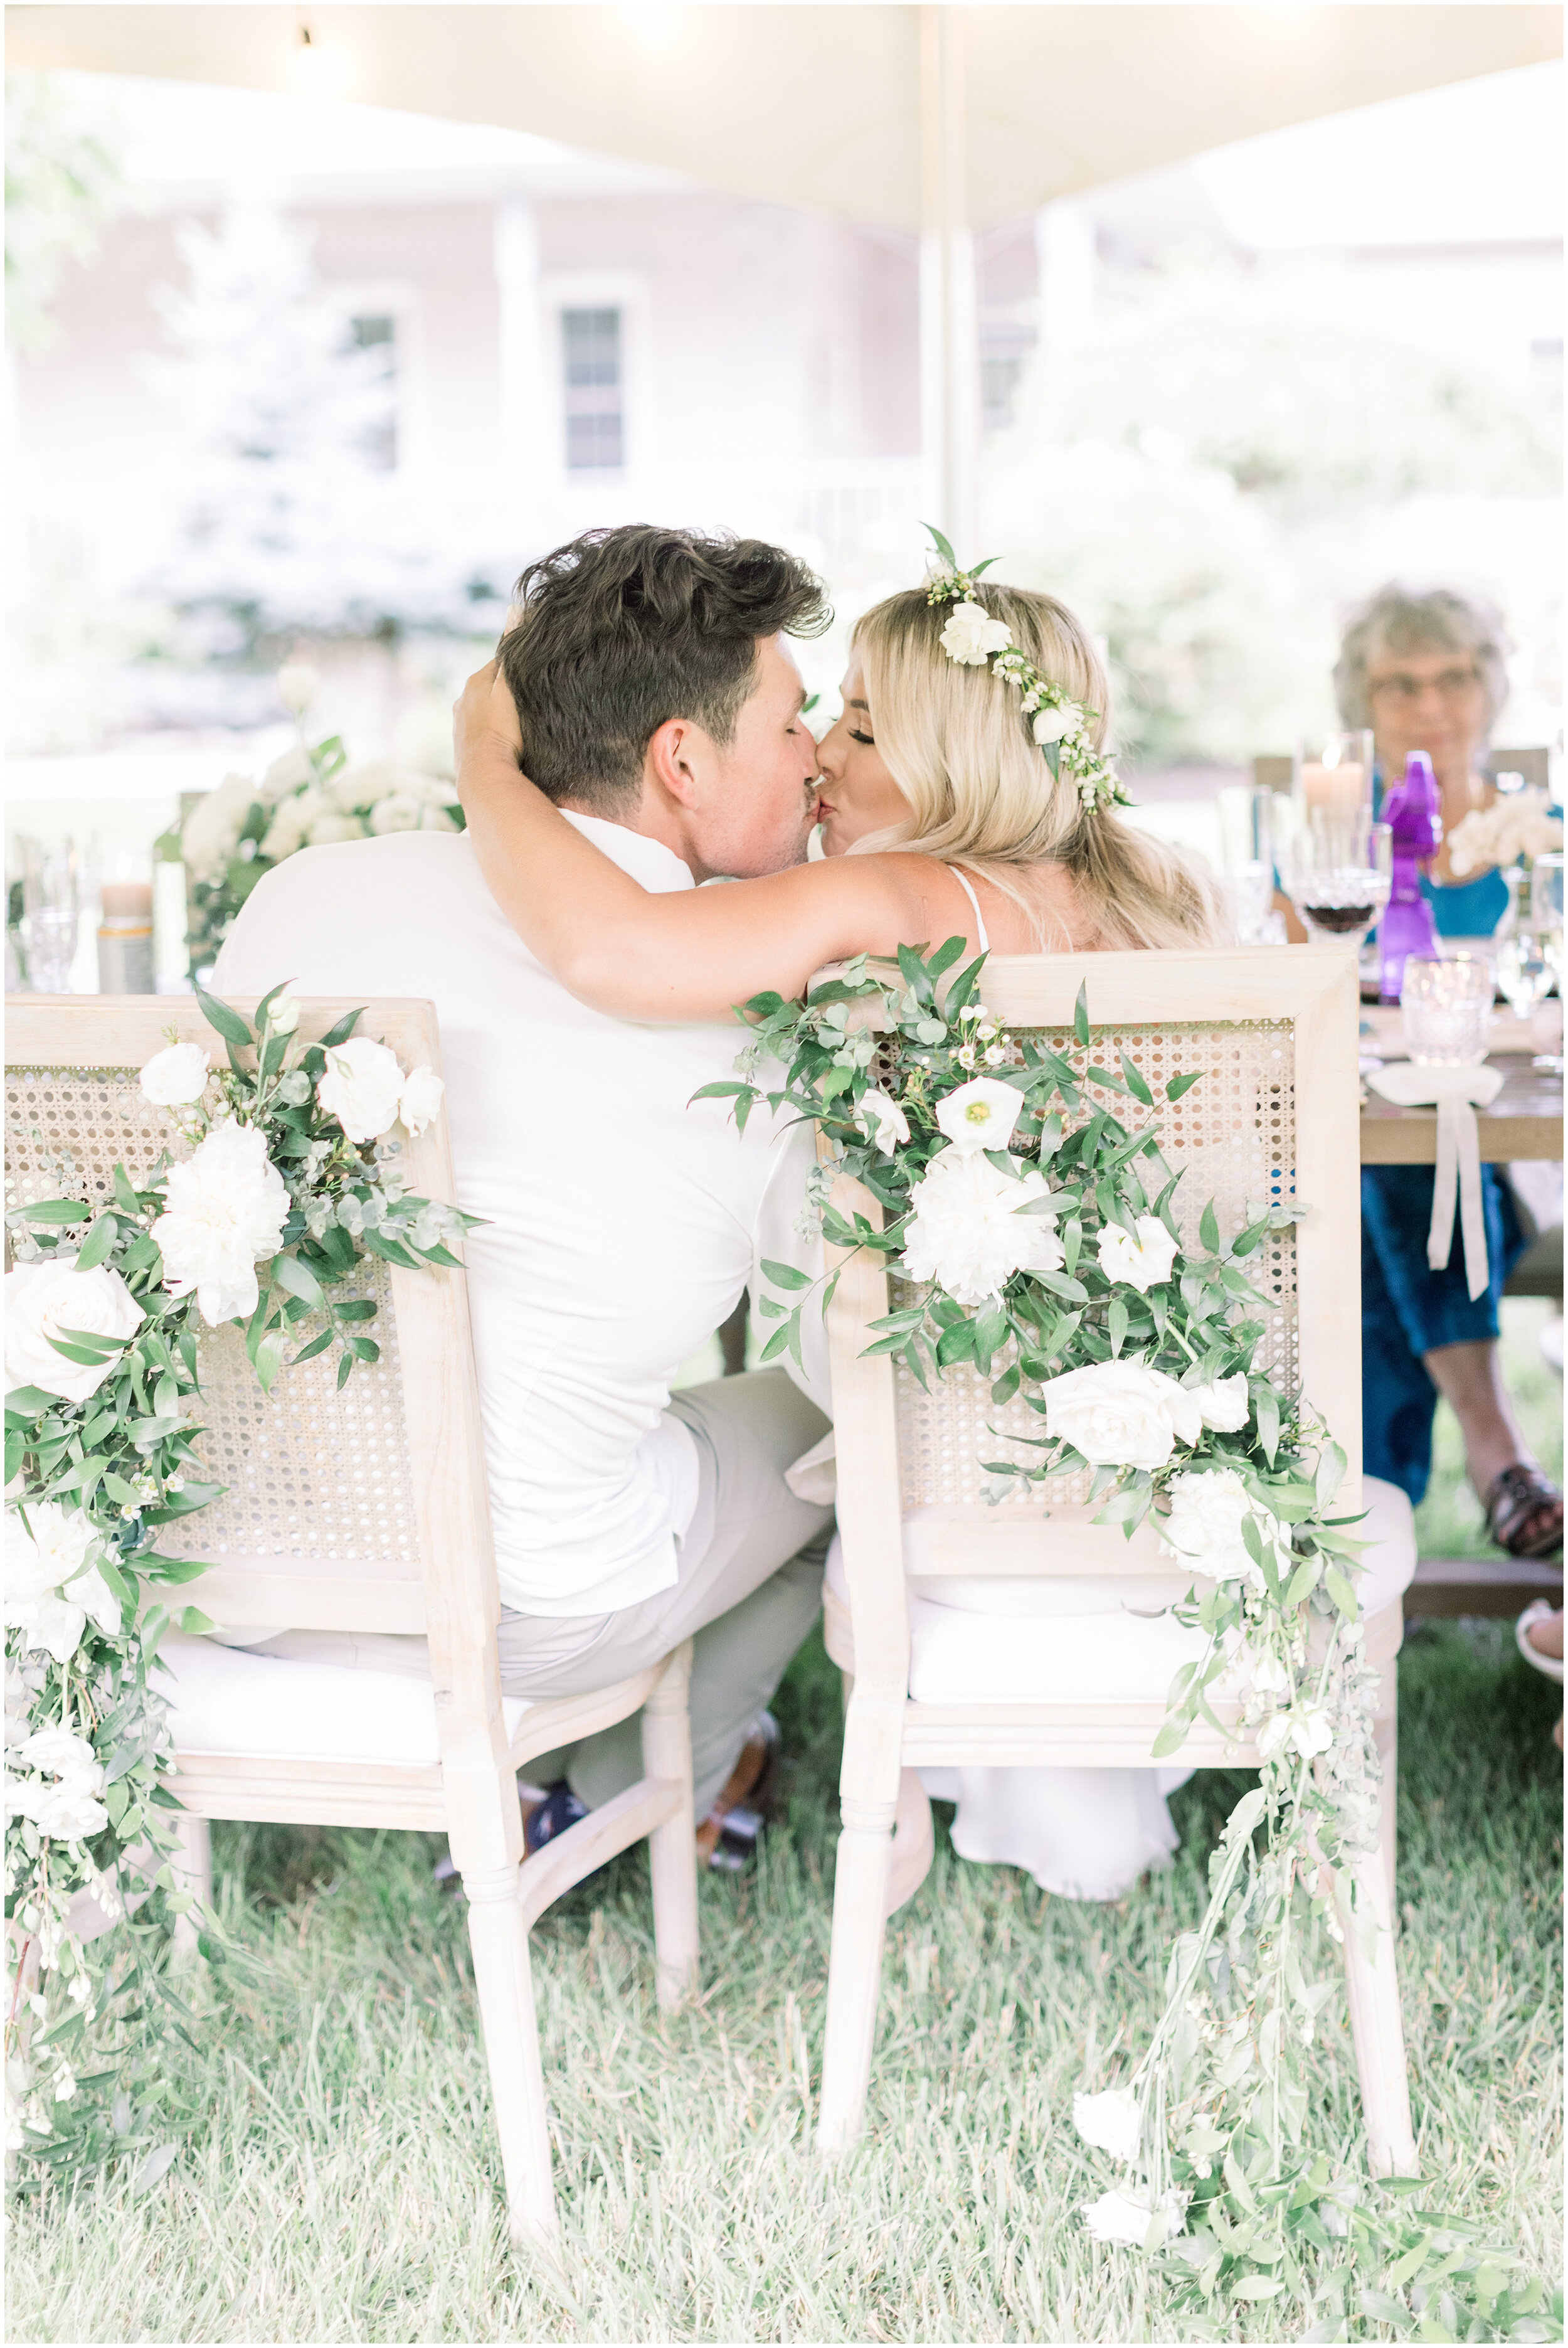  Beautiful outdoor wedding with flowers hanging on the back of chairs during the wedding dinner in Ottawa, ON by Chelsea Mason Photography. outdoor wedding decor simple backyard wedding decor white flower wedding decor seat decor for wedding how to d